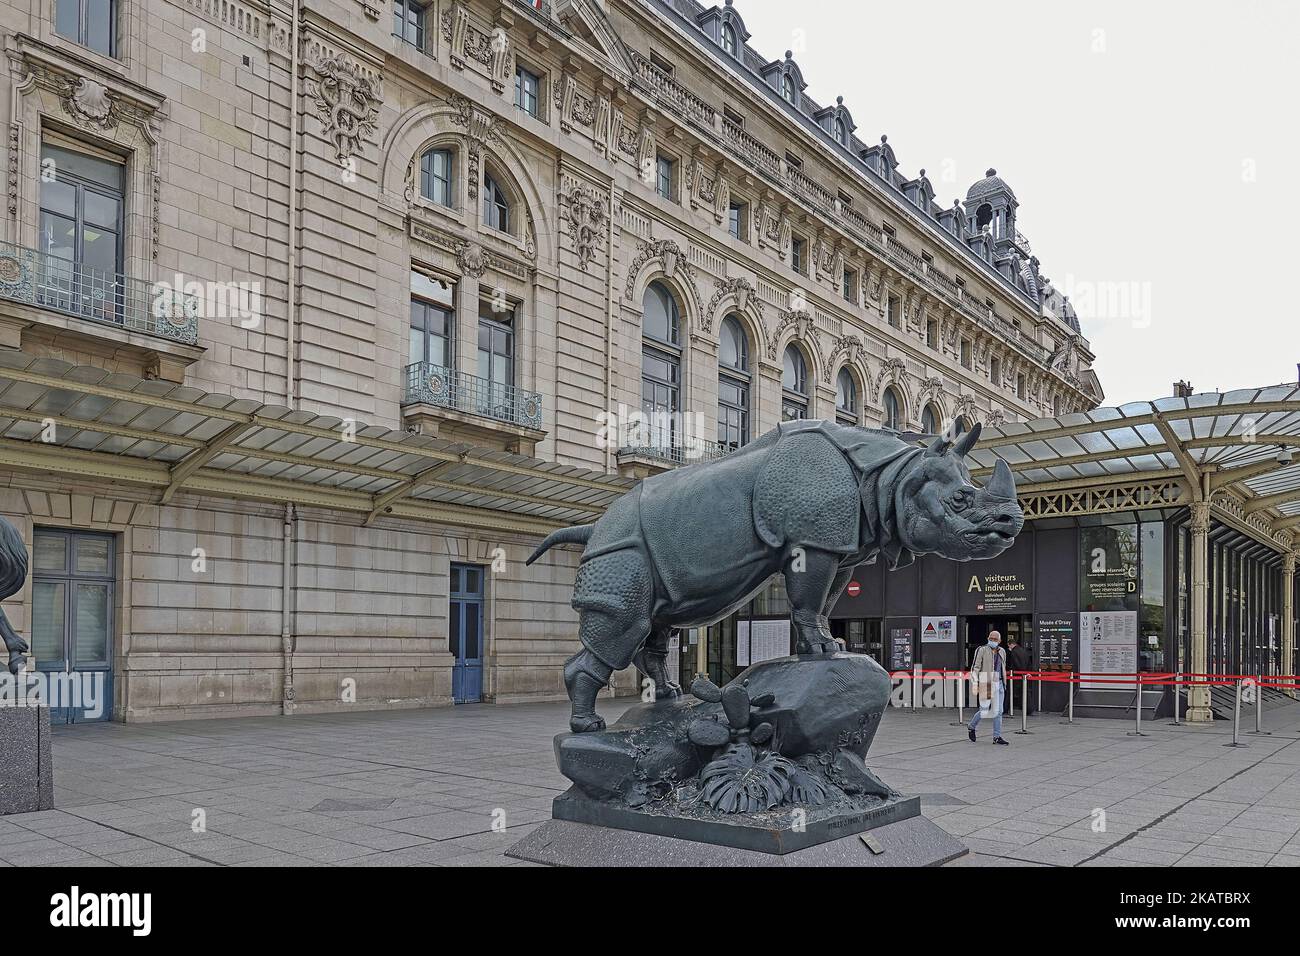 France, Paris, Musee d'Orsay - Orsay Museum housed in the former Gare d'Orsay, a Beaux-Arts railway station. t houses the largest collection of Impres Stock Photo